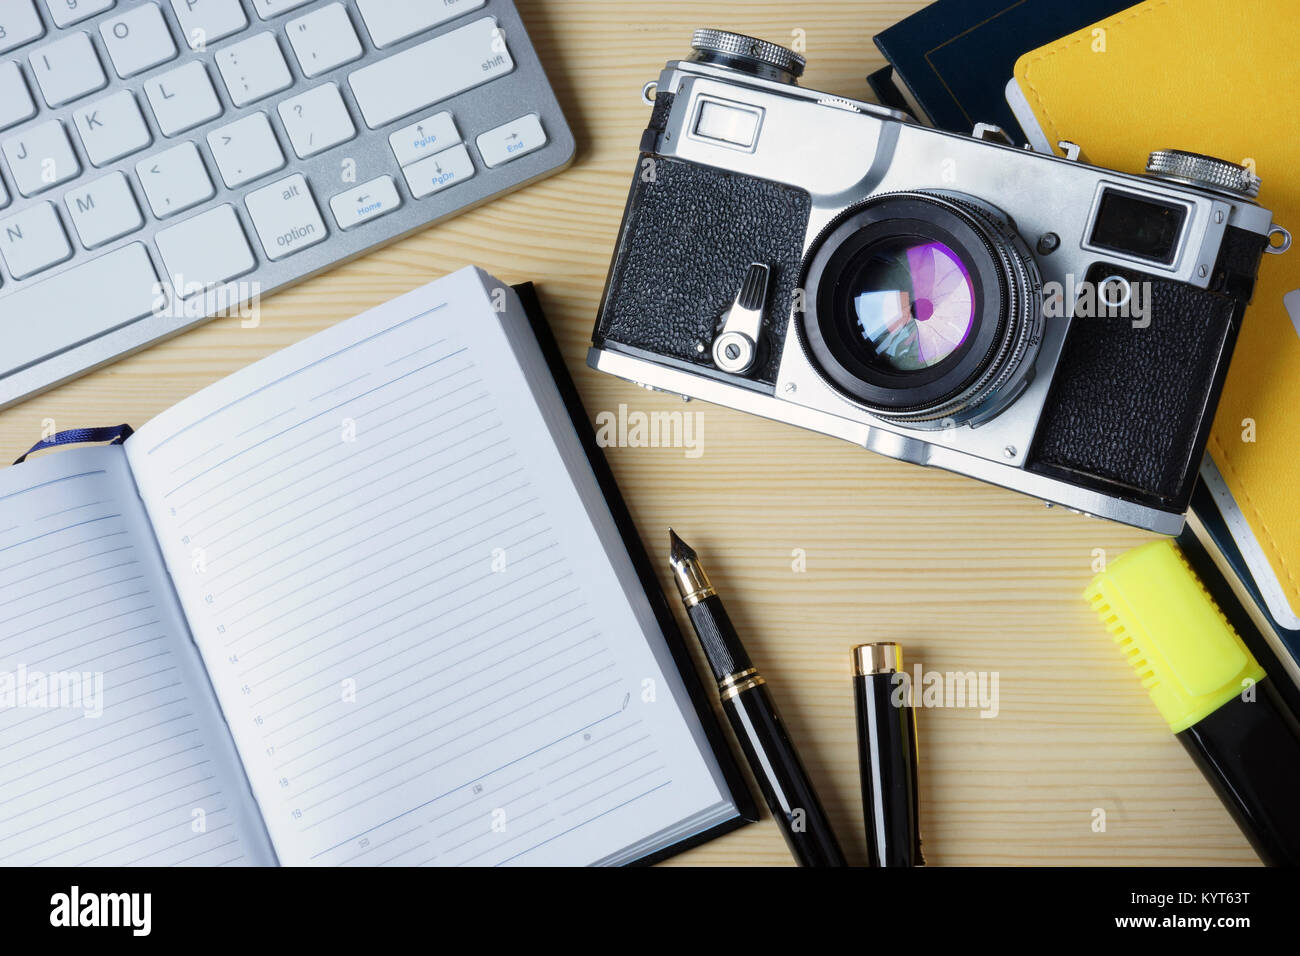 Open note pad, keyboard and vintage photo camera on a wooden desk. Mock-up. Stock Photo